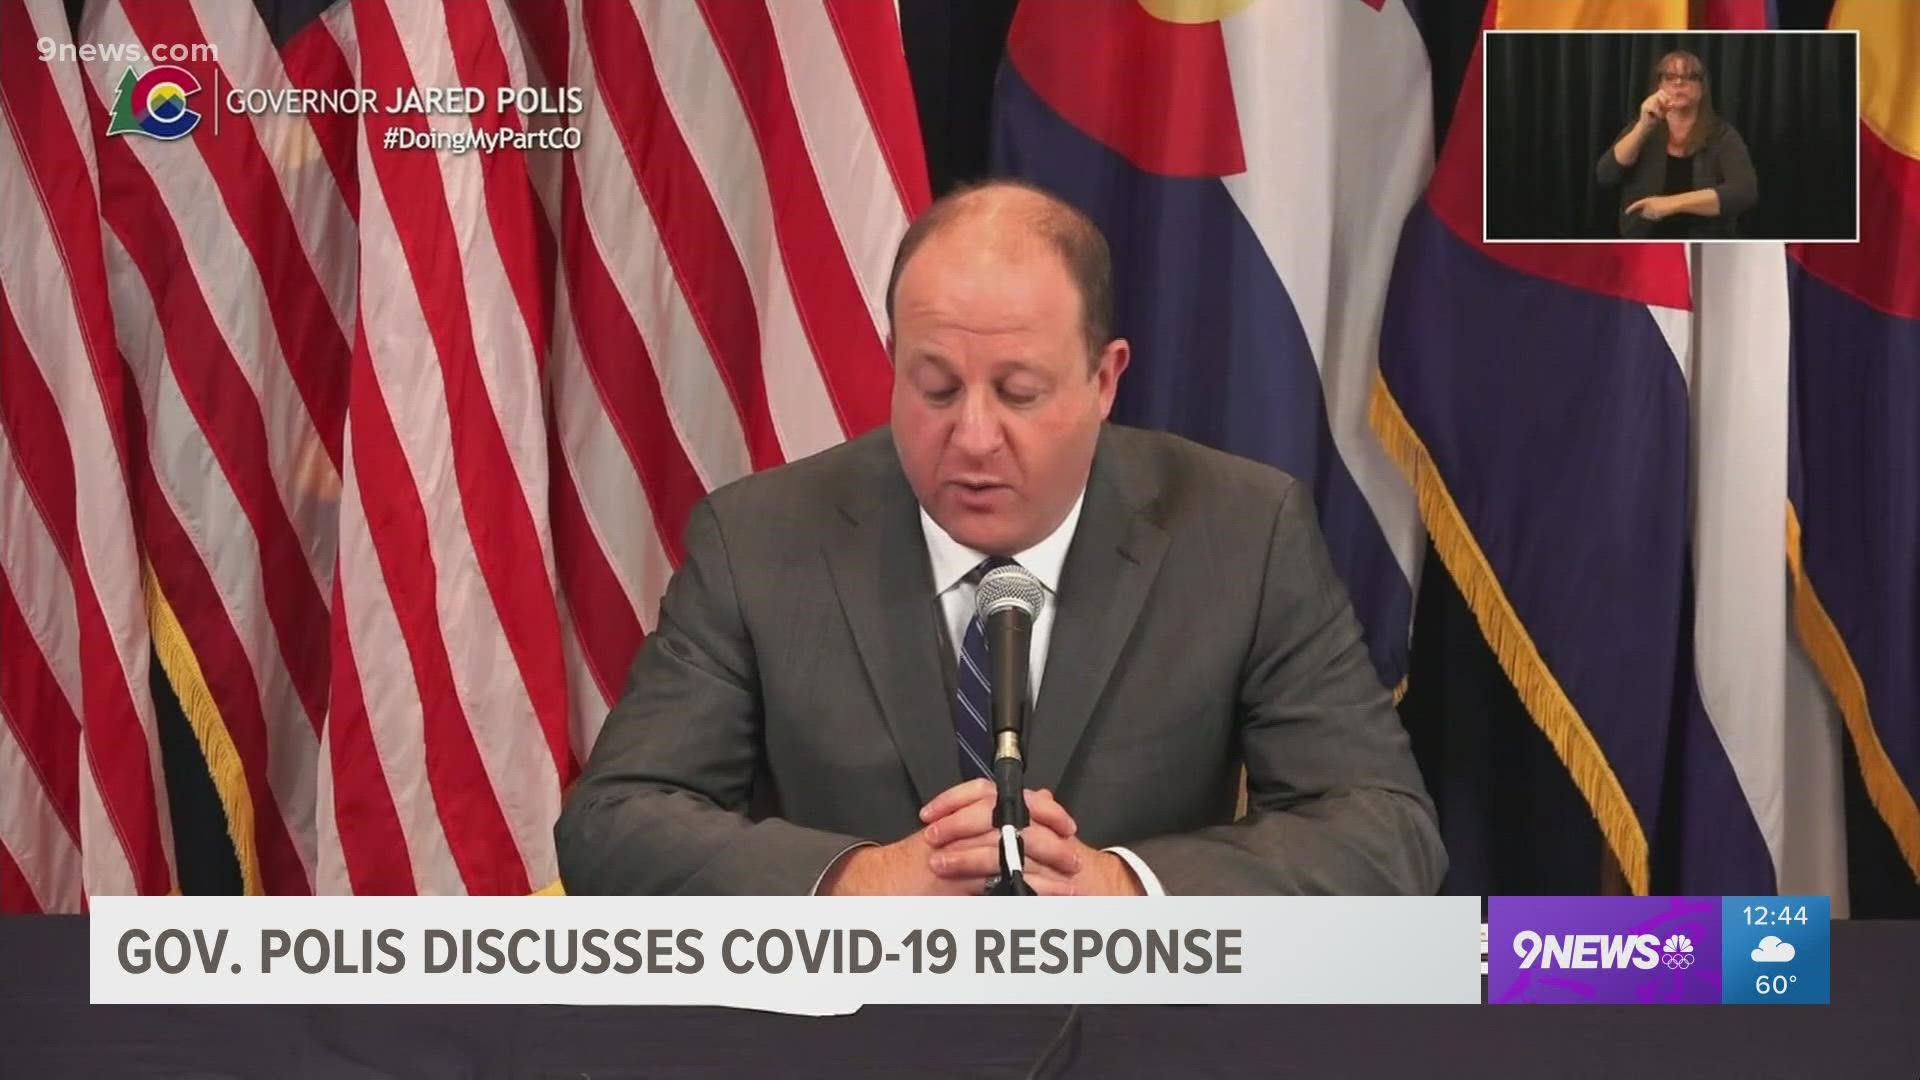 Gov. Polis gave an update on Colorado's response to the COVID-19 pandemic and the vaccination efforts.